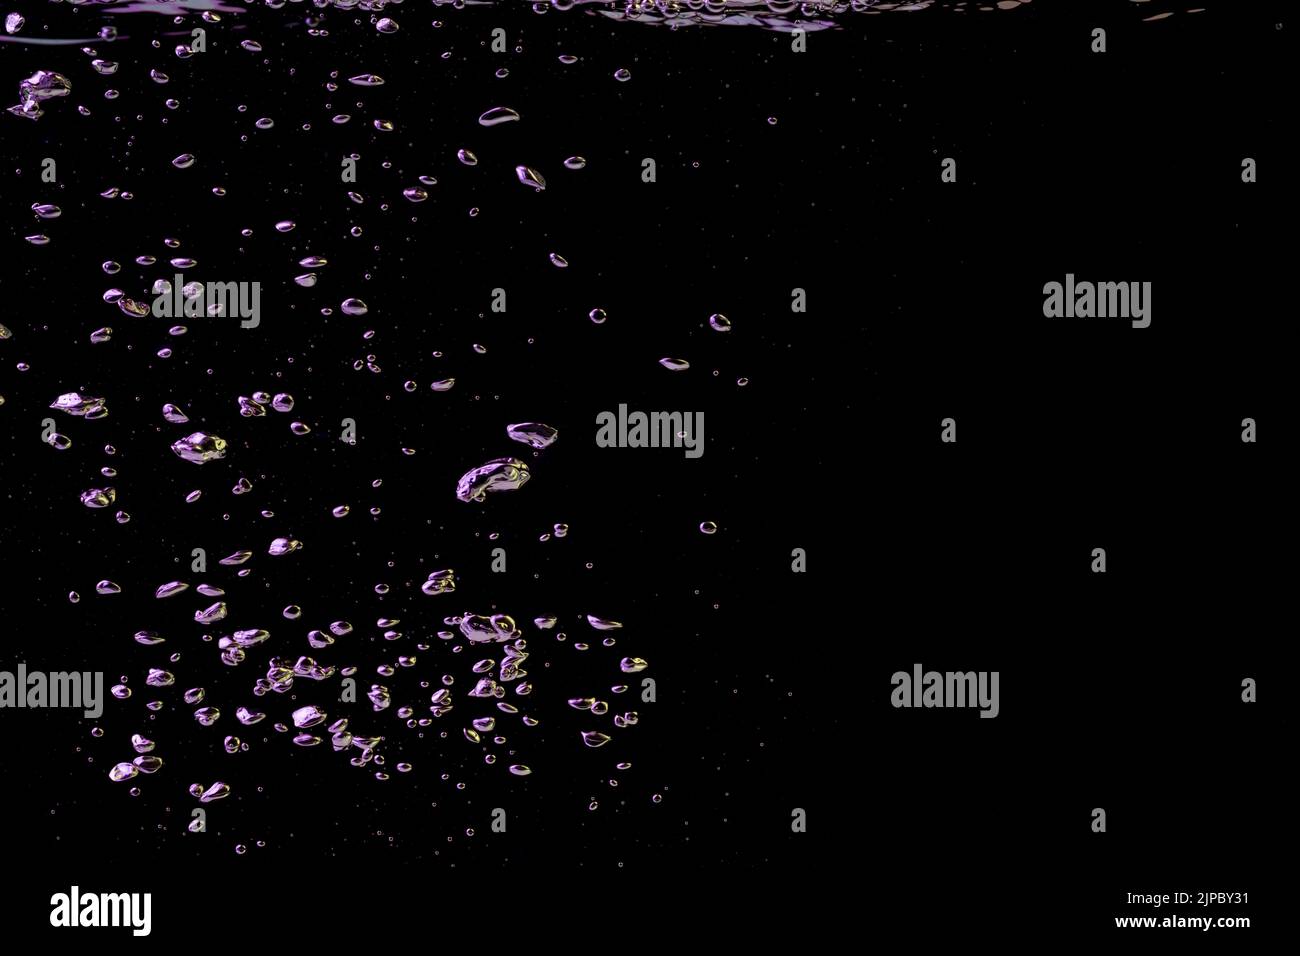 A bubble splash in transparent clear water liquid in yellow and purple light on a black nature background Stock Photo